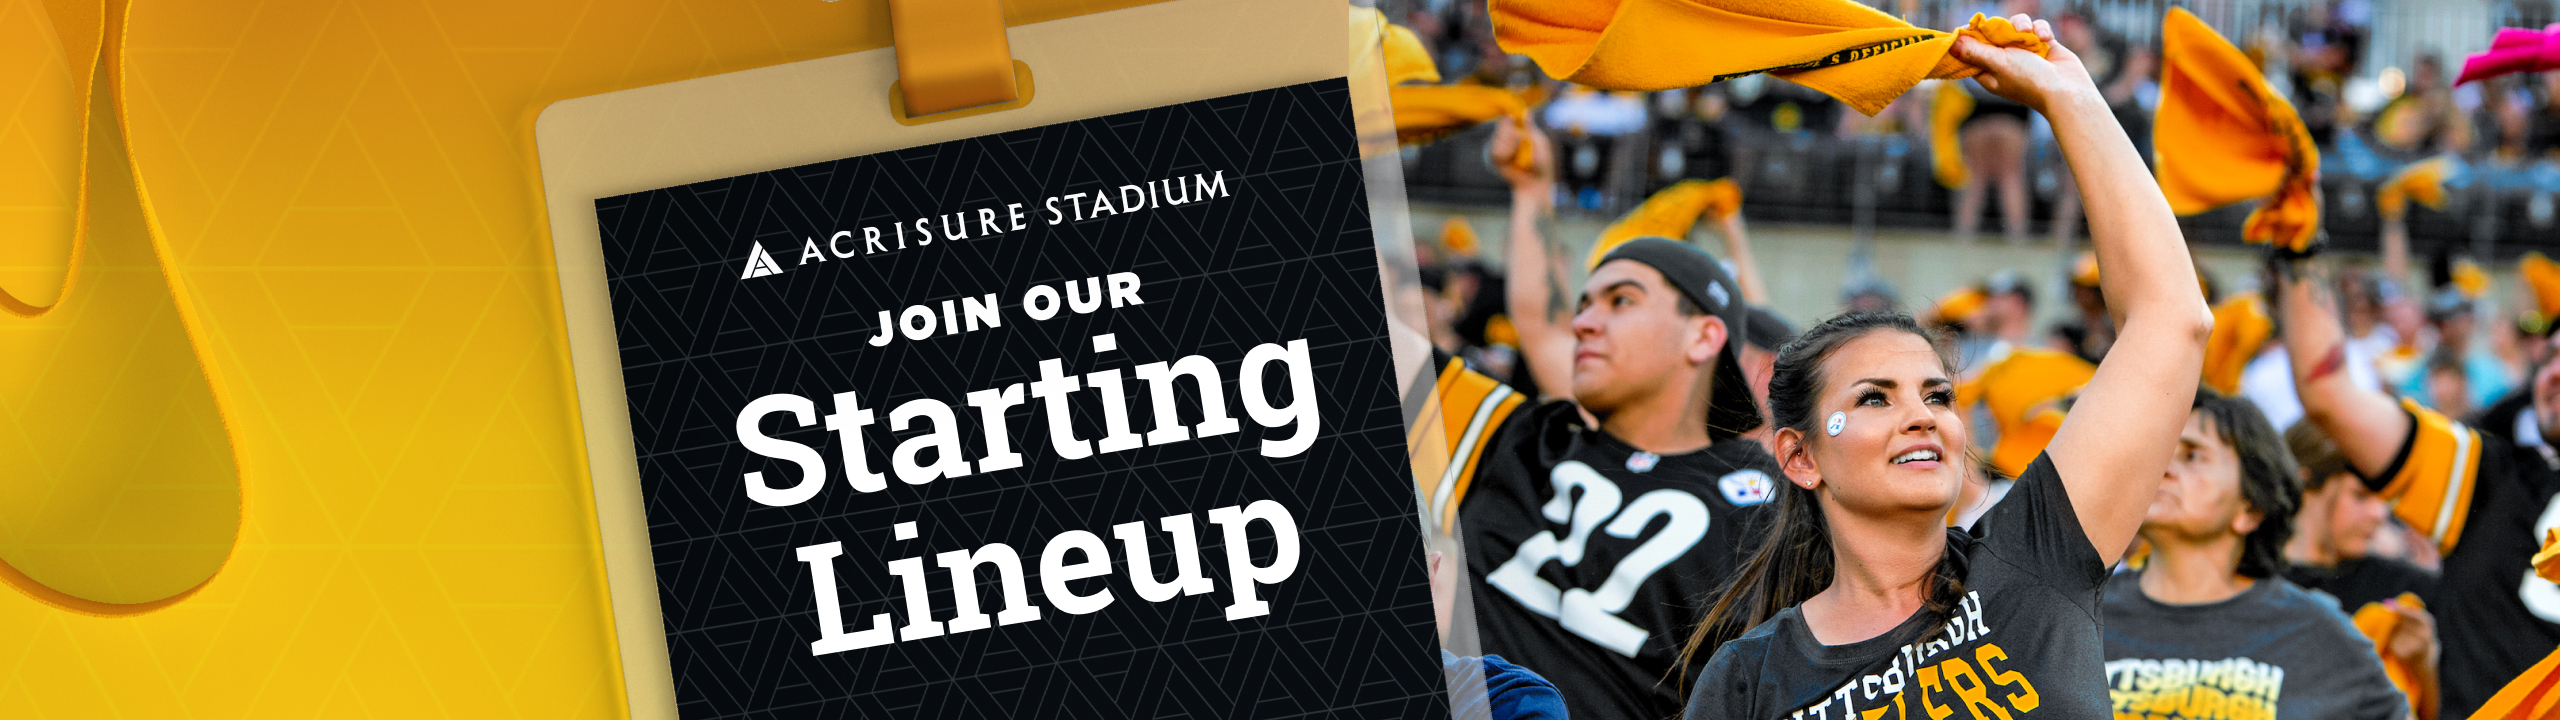 Acrisure Stadium Employment Graphic - Join our Starting Lineup